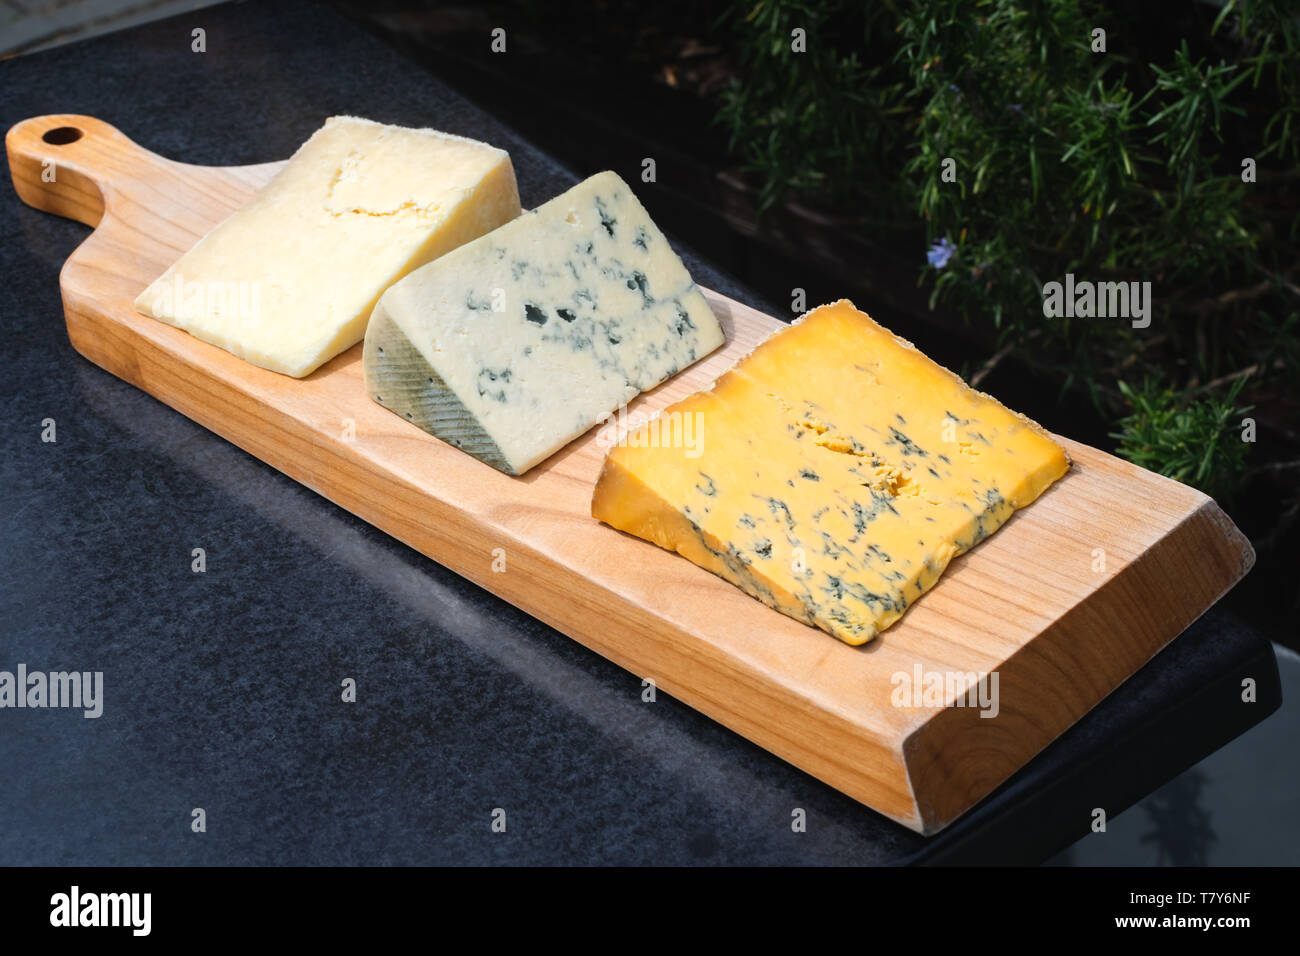 A selection of 3 larges pieces of cheese on a wooden platter board in a garden in the summer sun Stock Photo